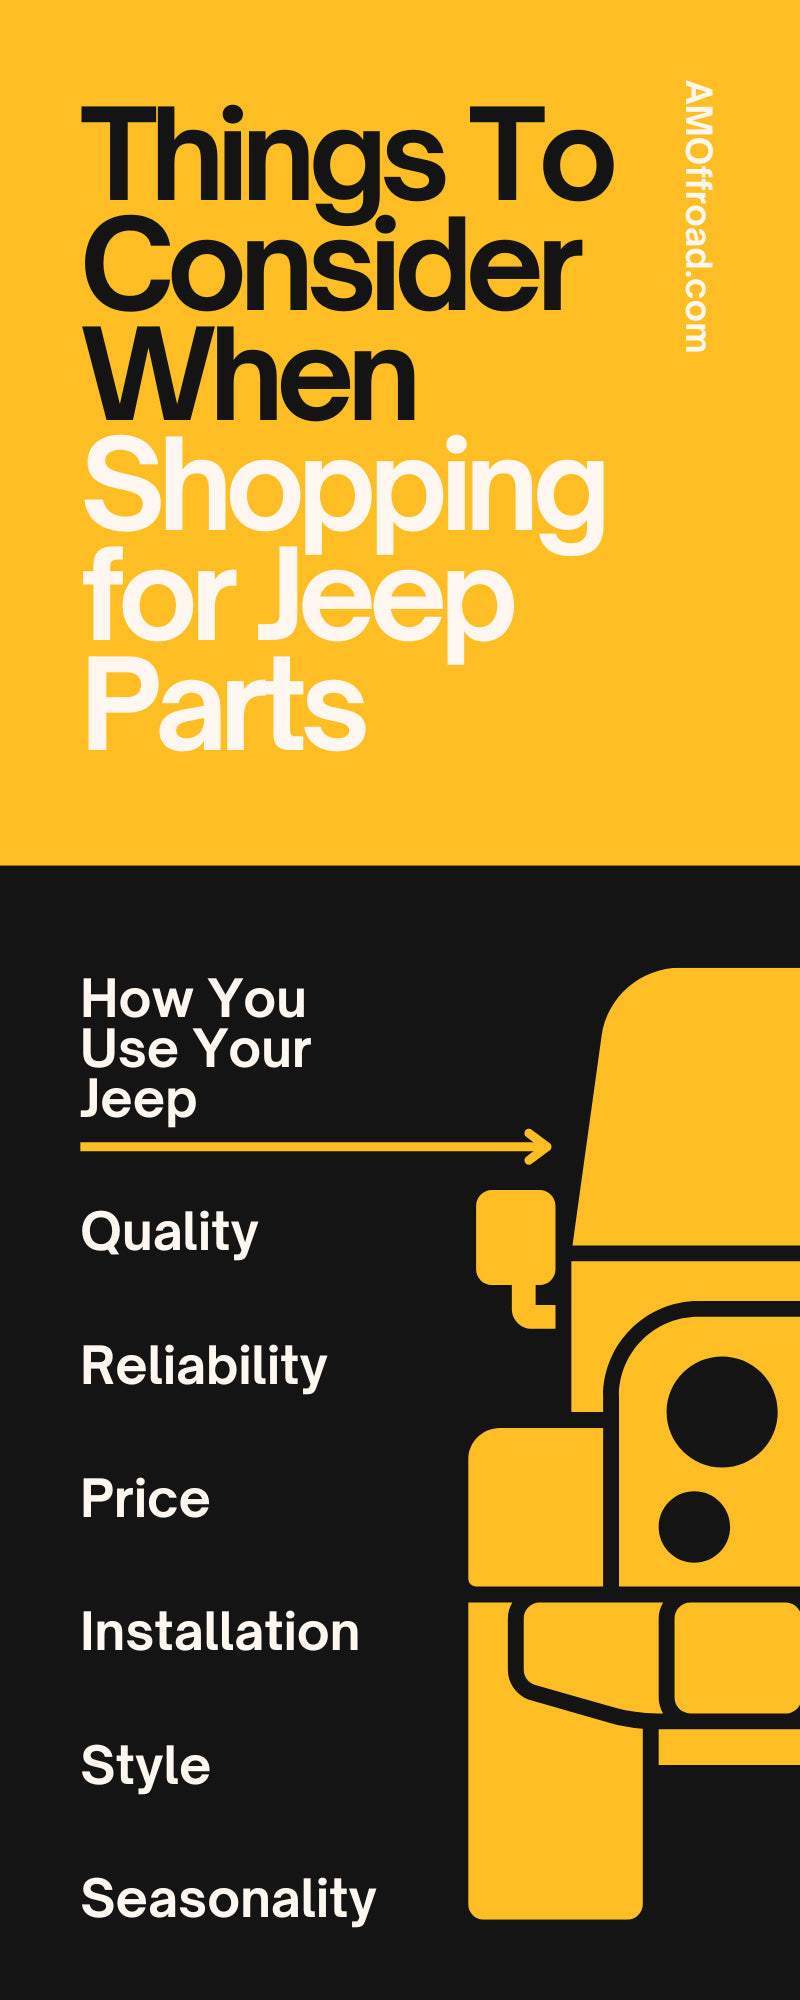 Things To Consider When Shopping for Jeep Parts